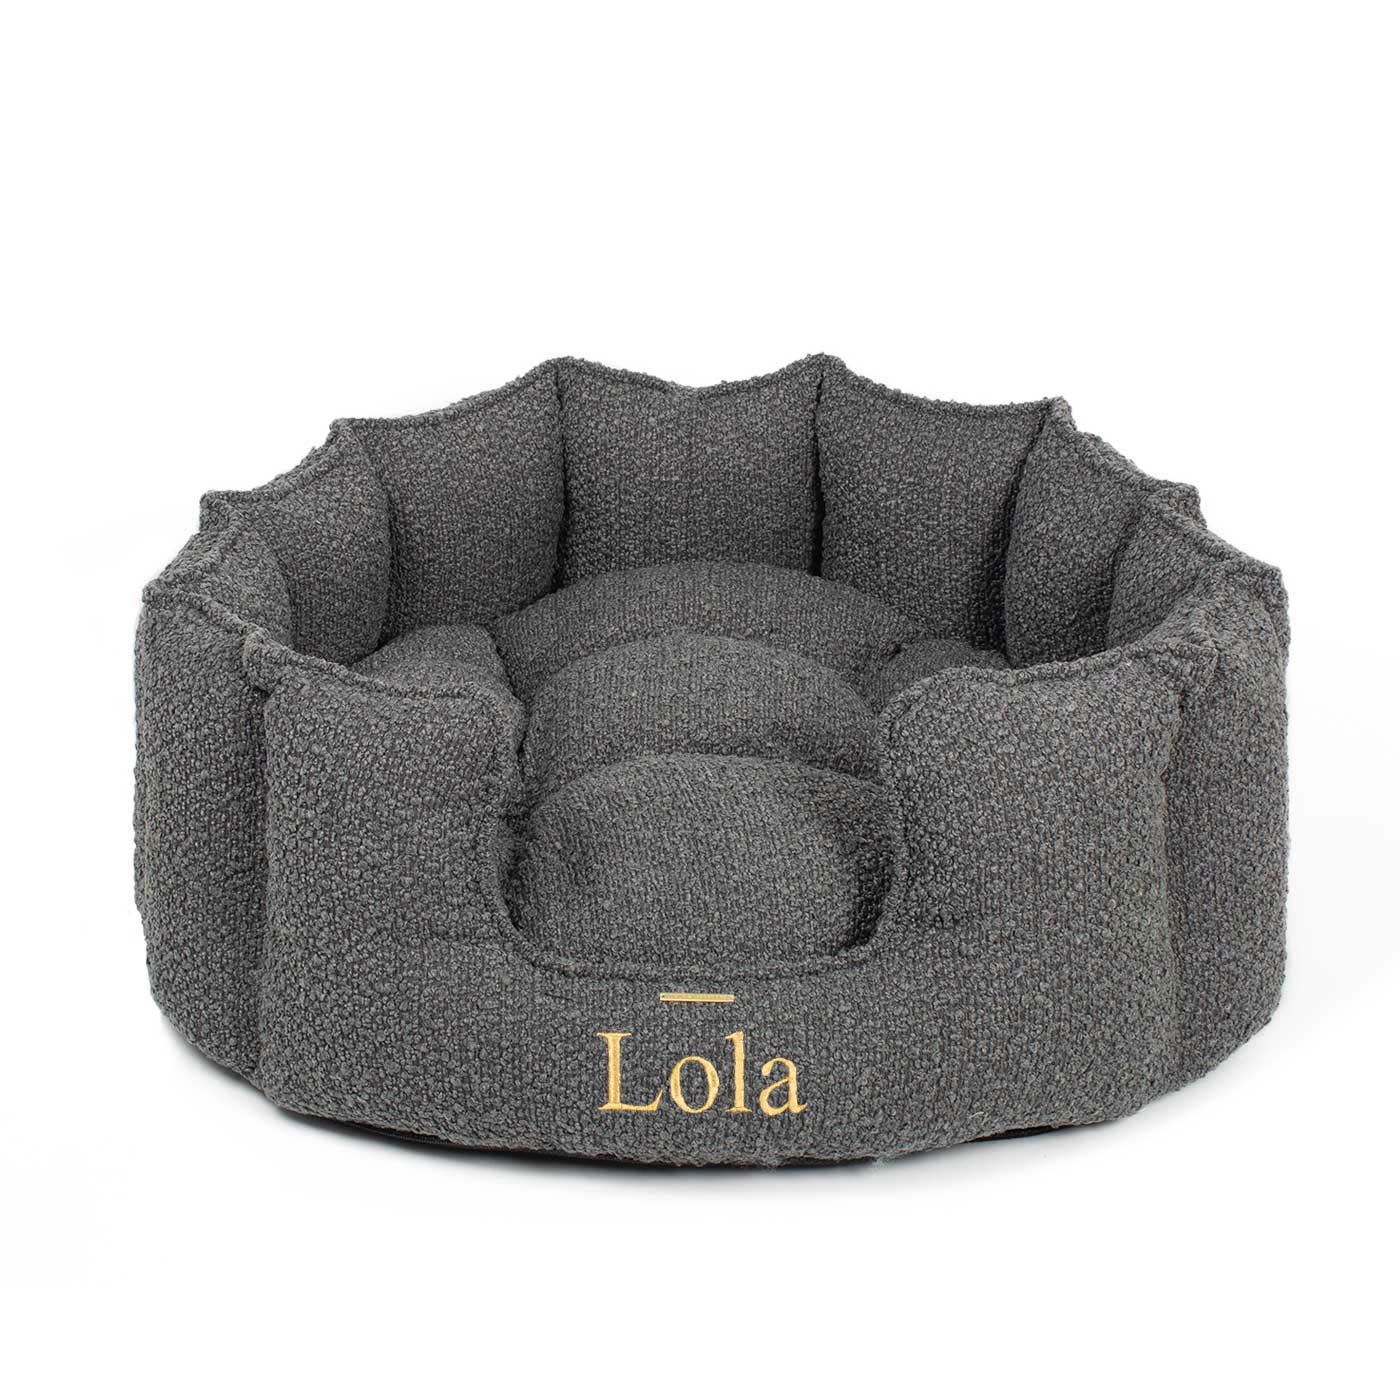 Discover Our Luxurious High Wall Bed For Dogs & Puppies, Featuring inner pillow with plush teddy fleece on one side To Craft The Perfect Dog Bed In Stunning Granite Boucle! Available To Personalise Now at Lords & Labradors    